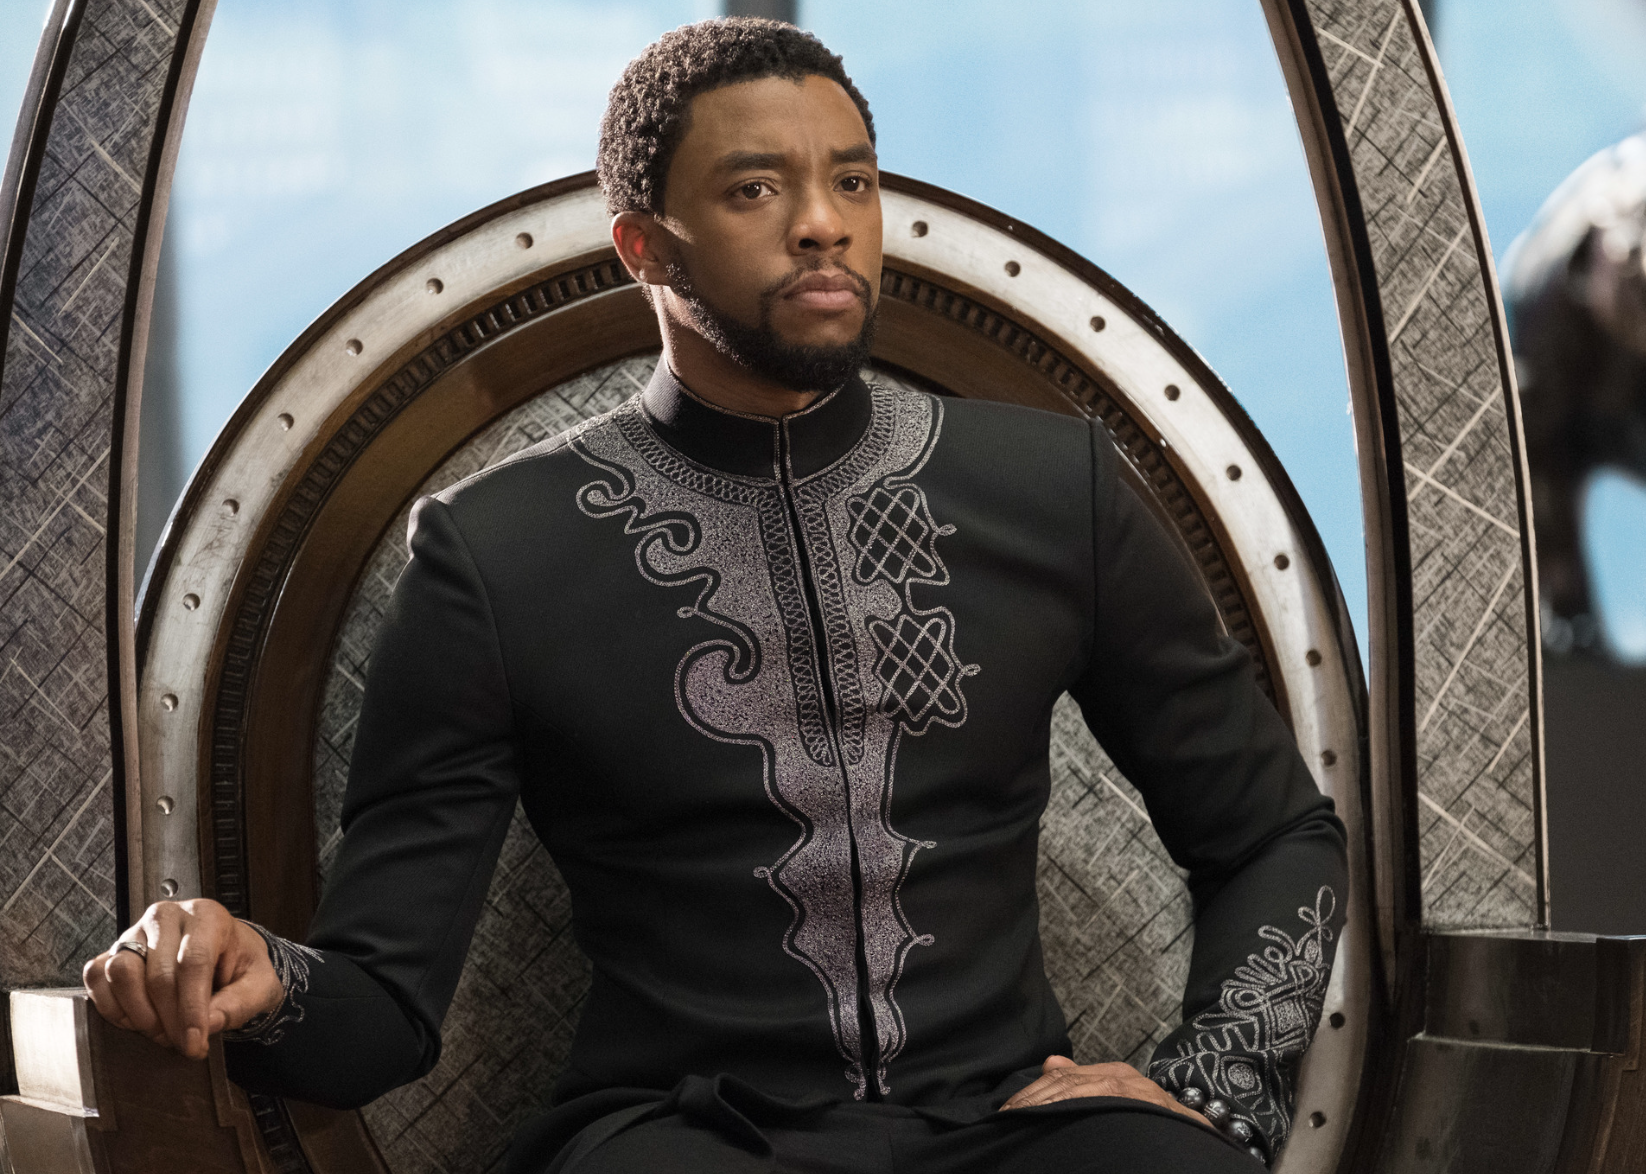 Chadwick Boseman in a scene from "Black Panther"